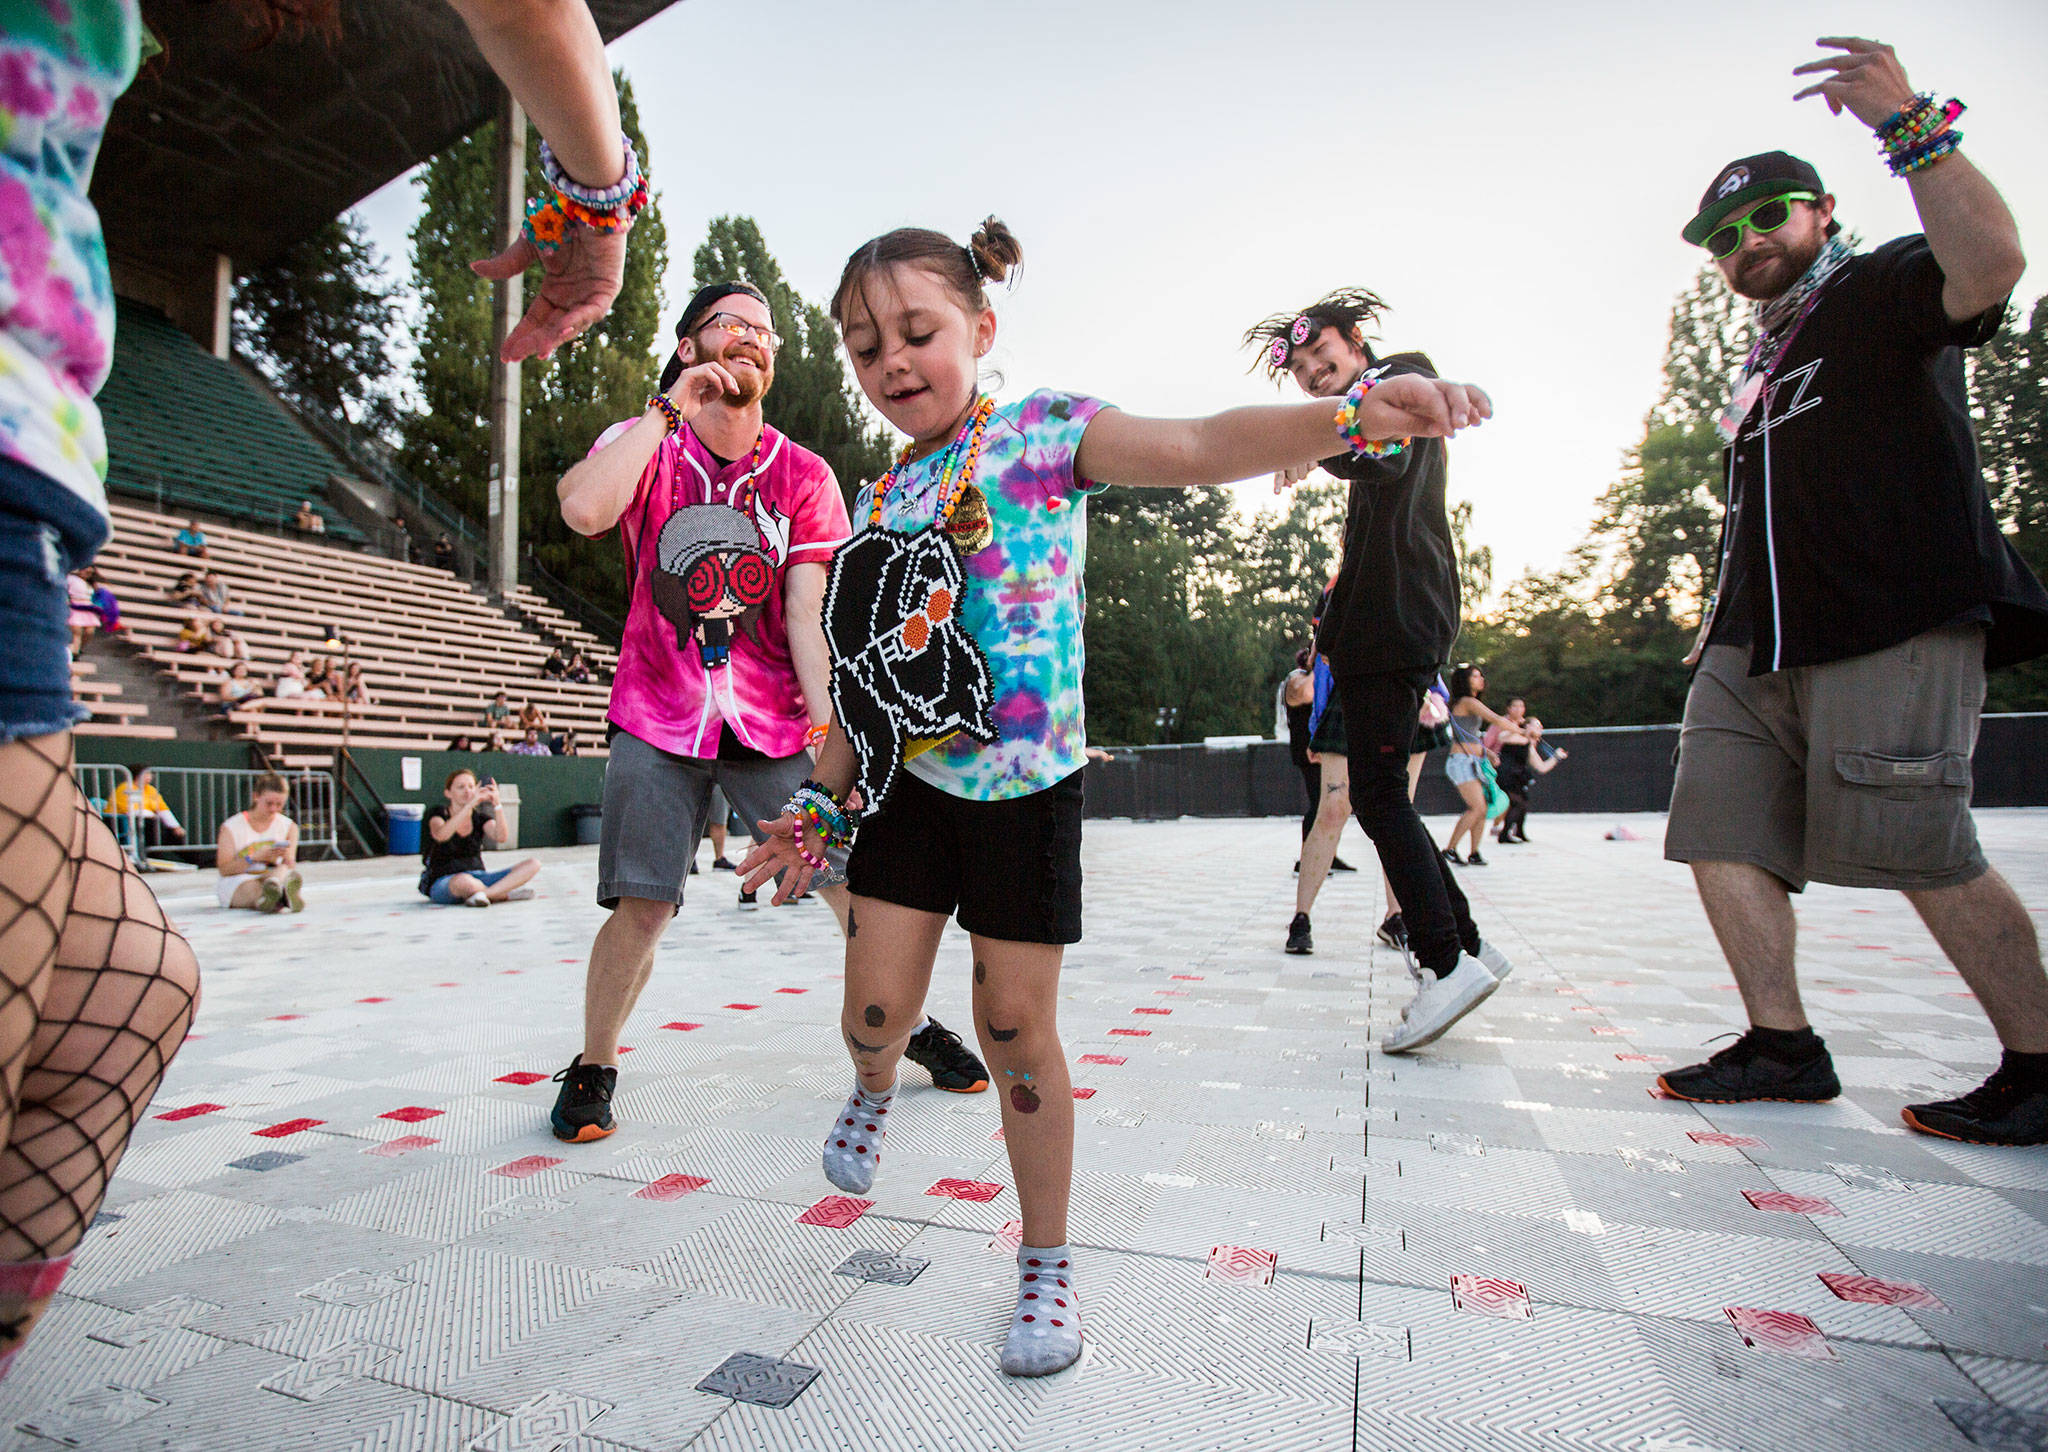 Skye Bassett, 6, dances with her family during Jai Wolf’s rescheduled performance at Bumbershoot Music & Arts Festival on Sunday, Sept. 1, 2019 in Seattle, Wash. (Olivia Vanni / The Herald)